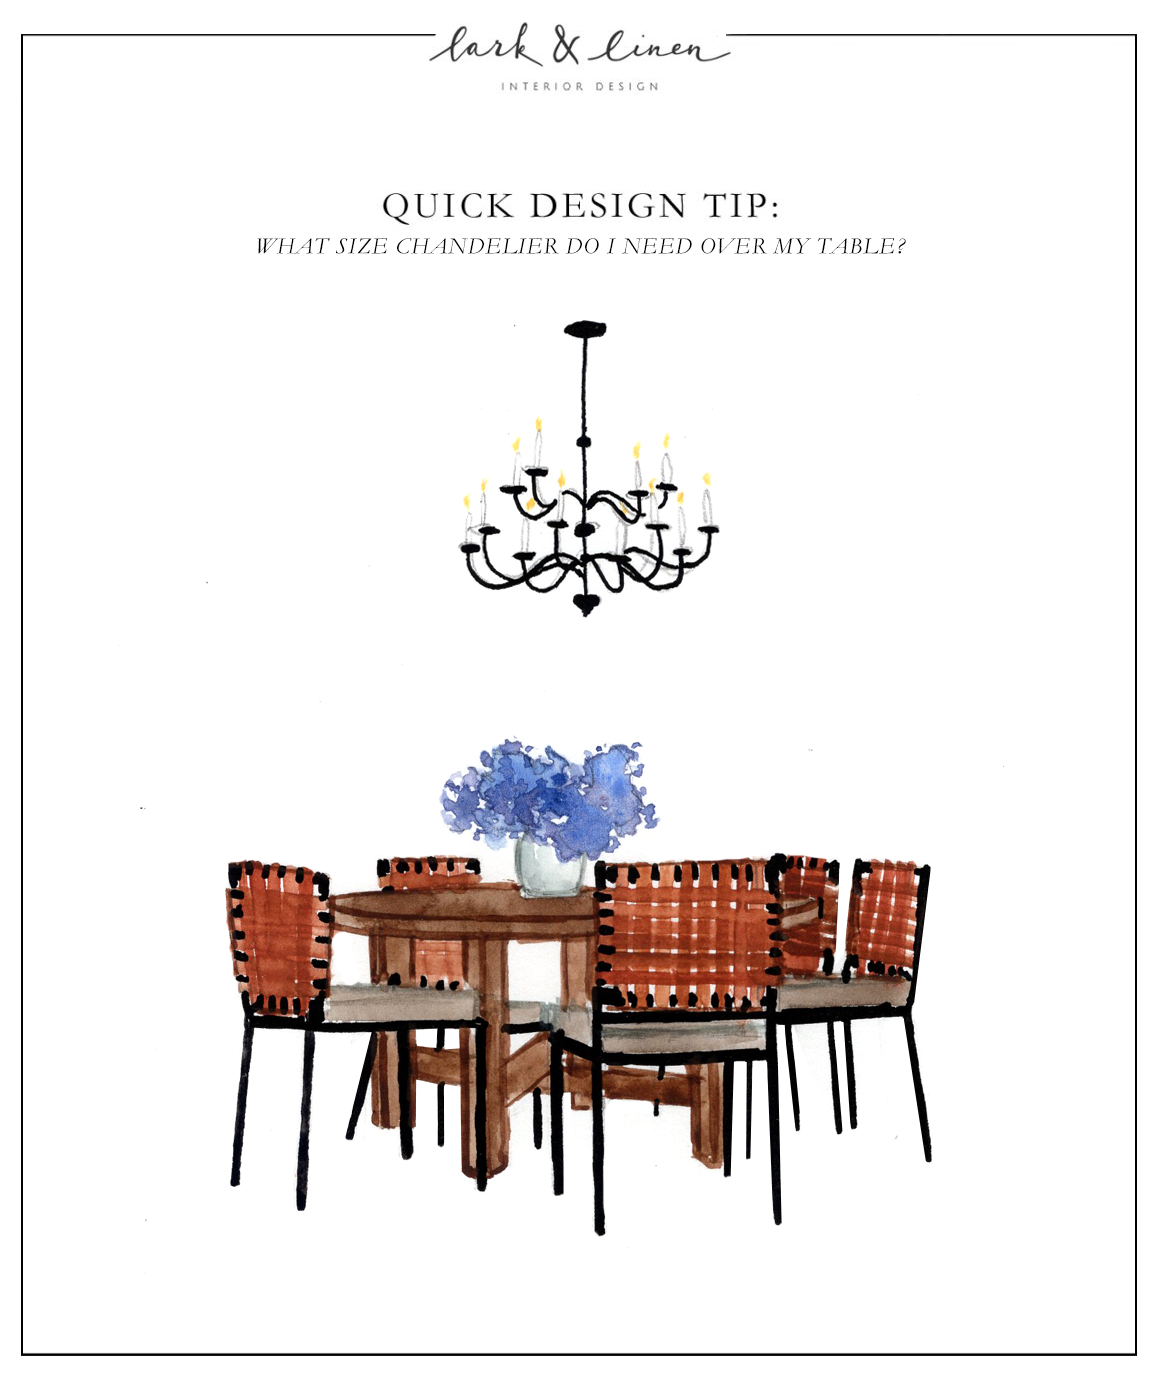 How Do You Figure Out What Size Dining Room Chandelier You Need? | lark & linen